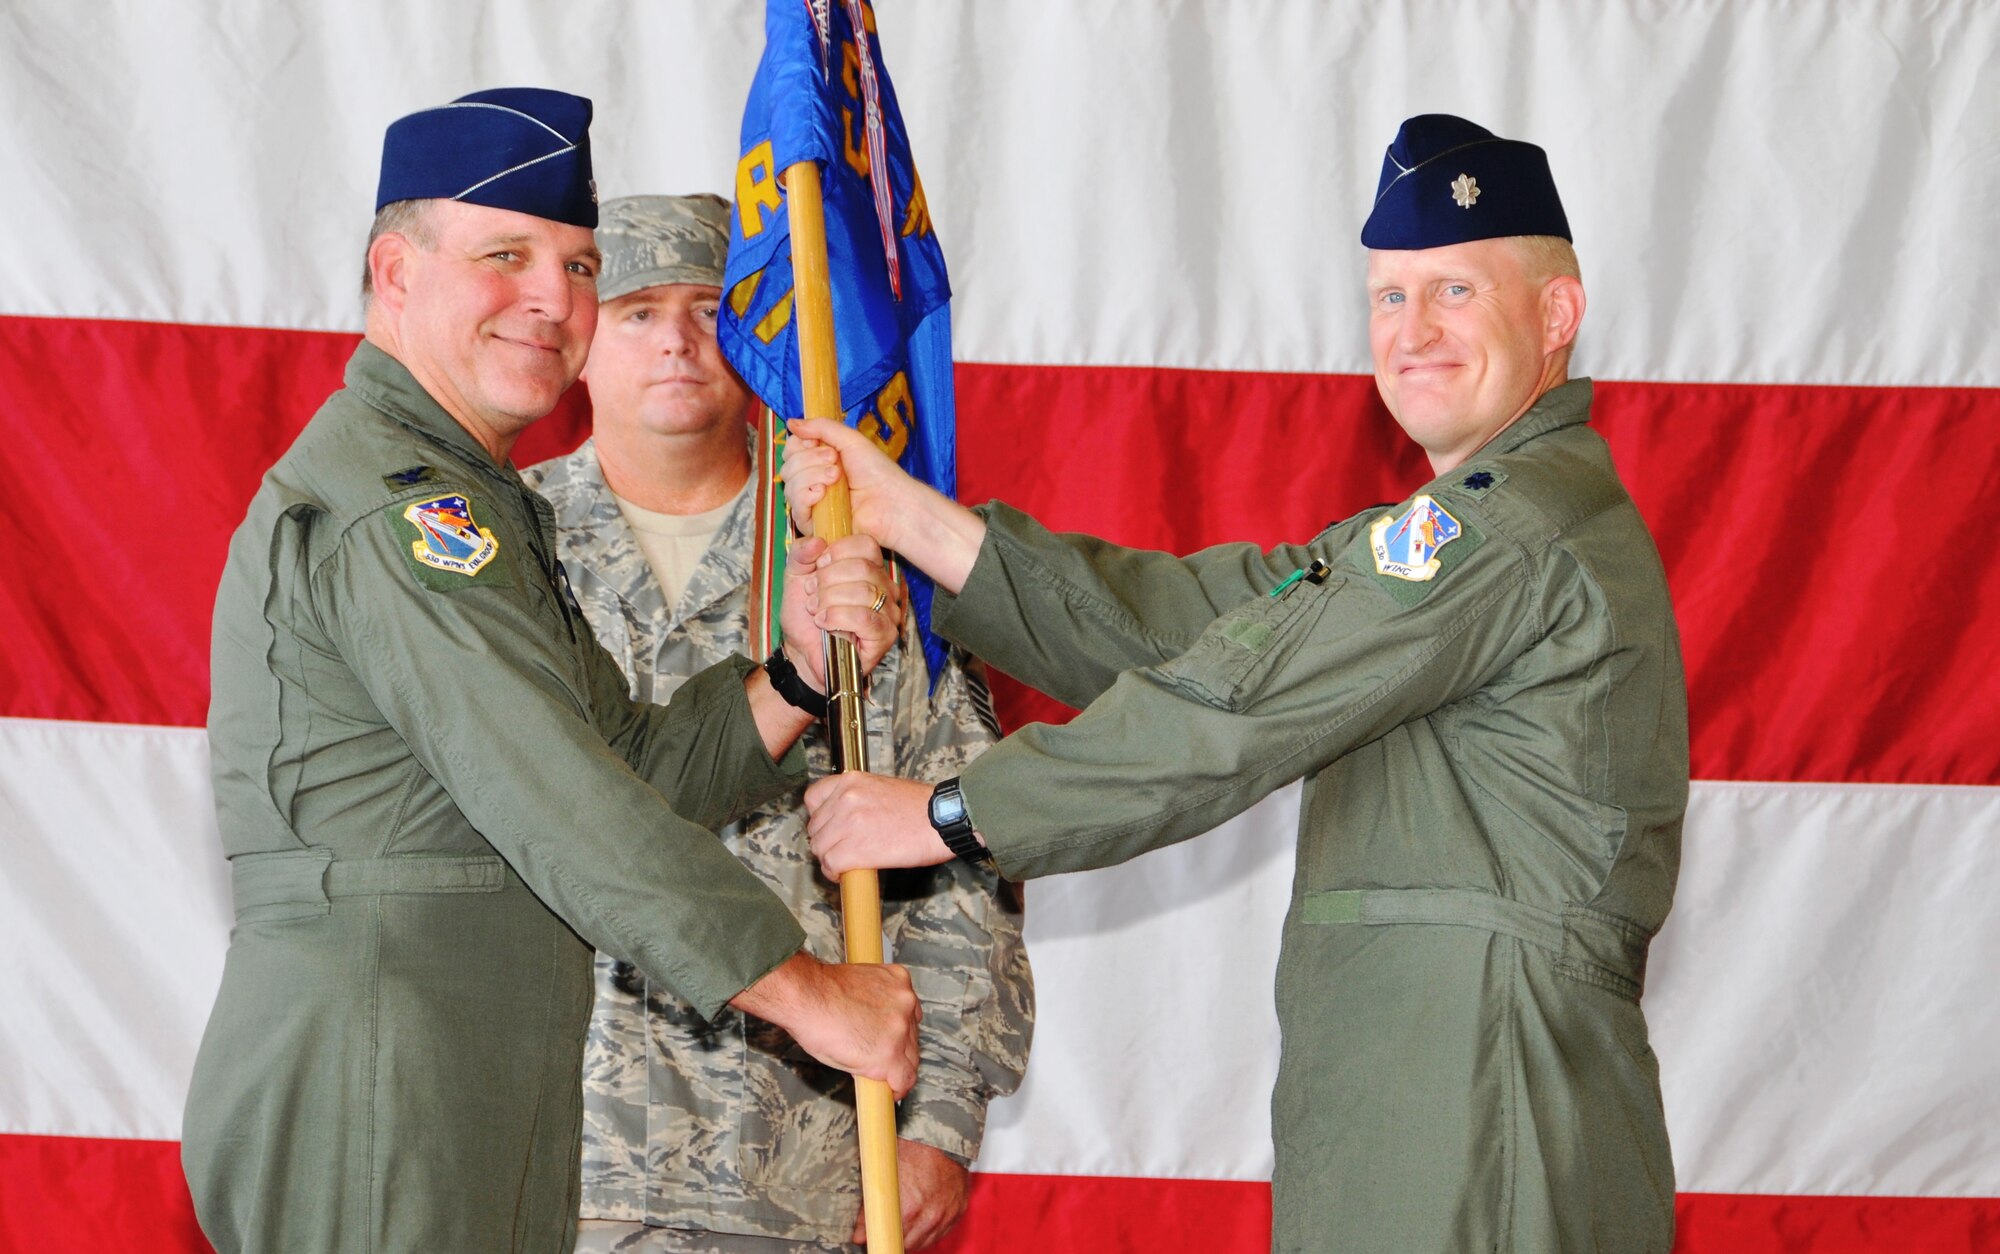 (Left) Col. Michael MacWilliam, 53rd Weapons Evaluation Group commander, presents the guidon to Lt. Col. Ryan Luchsinger, as he takes command of the 82nd Arial Target Squadron. The change of command ceremony took place Aug. 28 at Hangar 5. (U.S. Air Force photo/Lisa Norman)